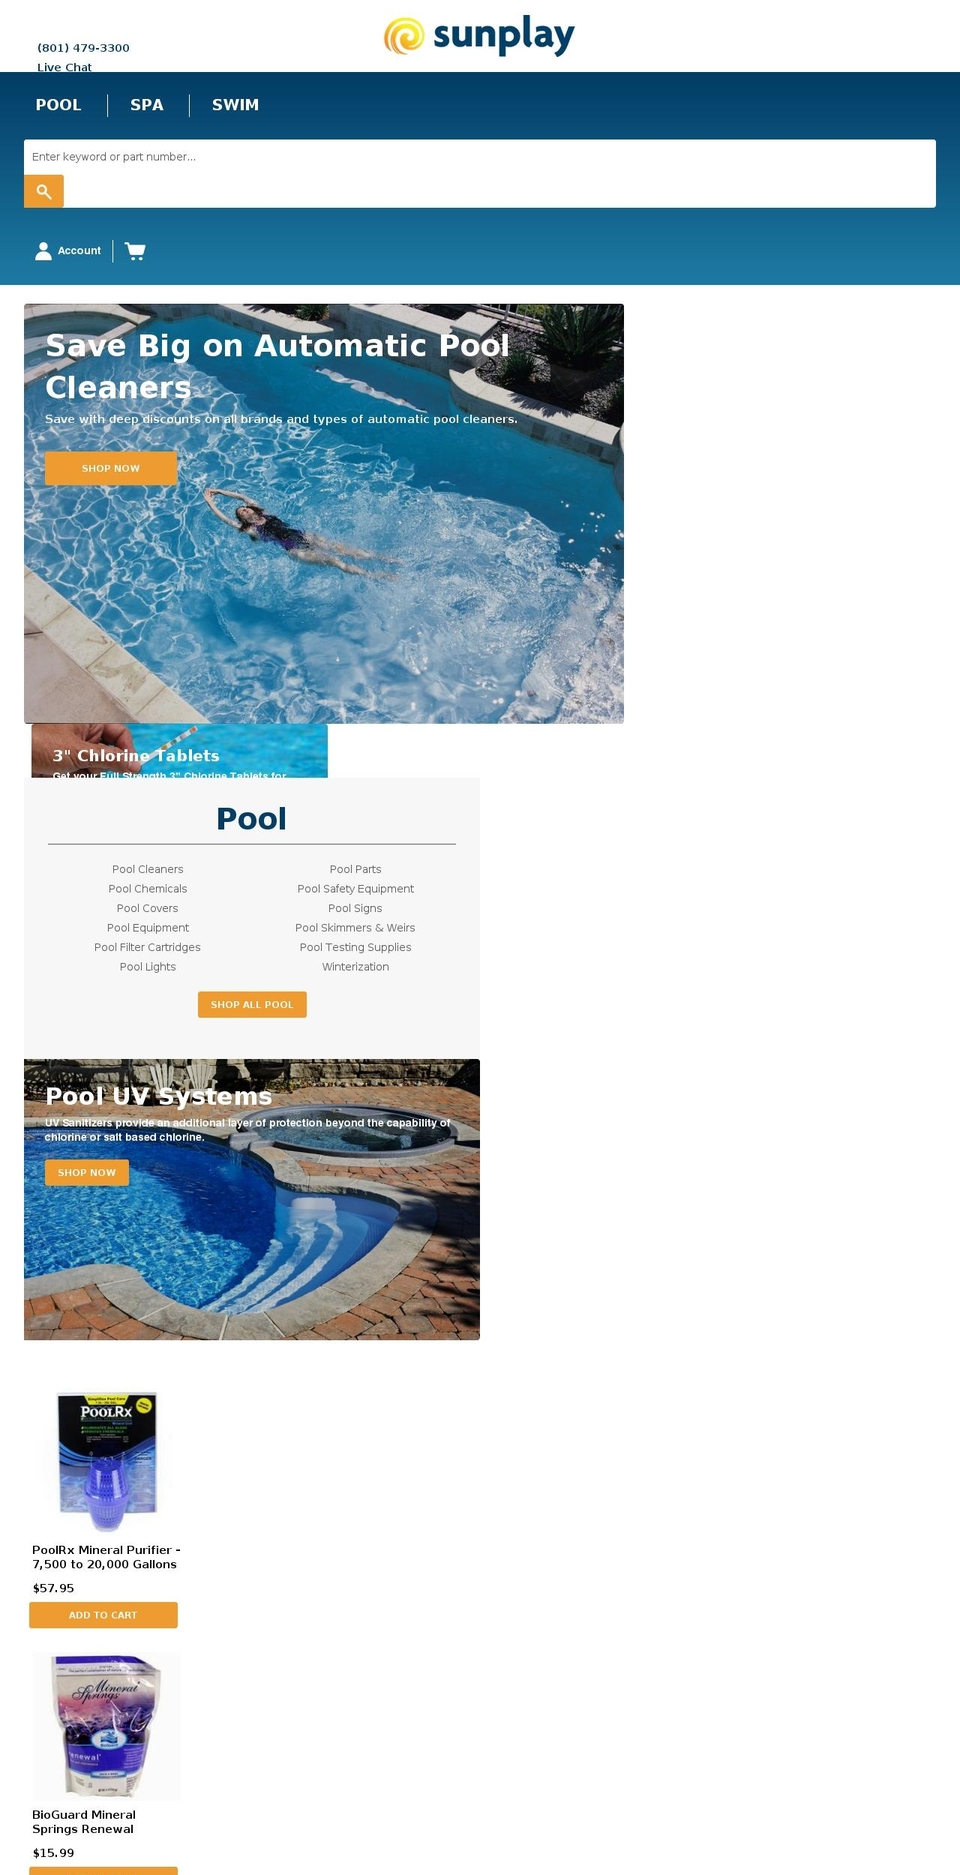 Sunplay v1.0 [Speck - Collection] Shopify theme site example sunplayspa.com